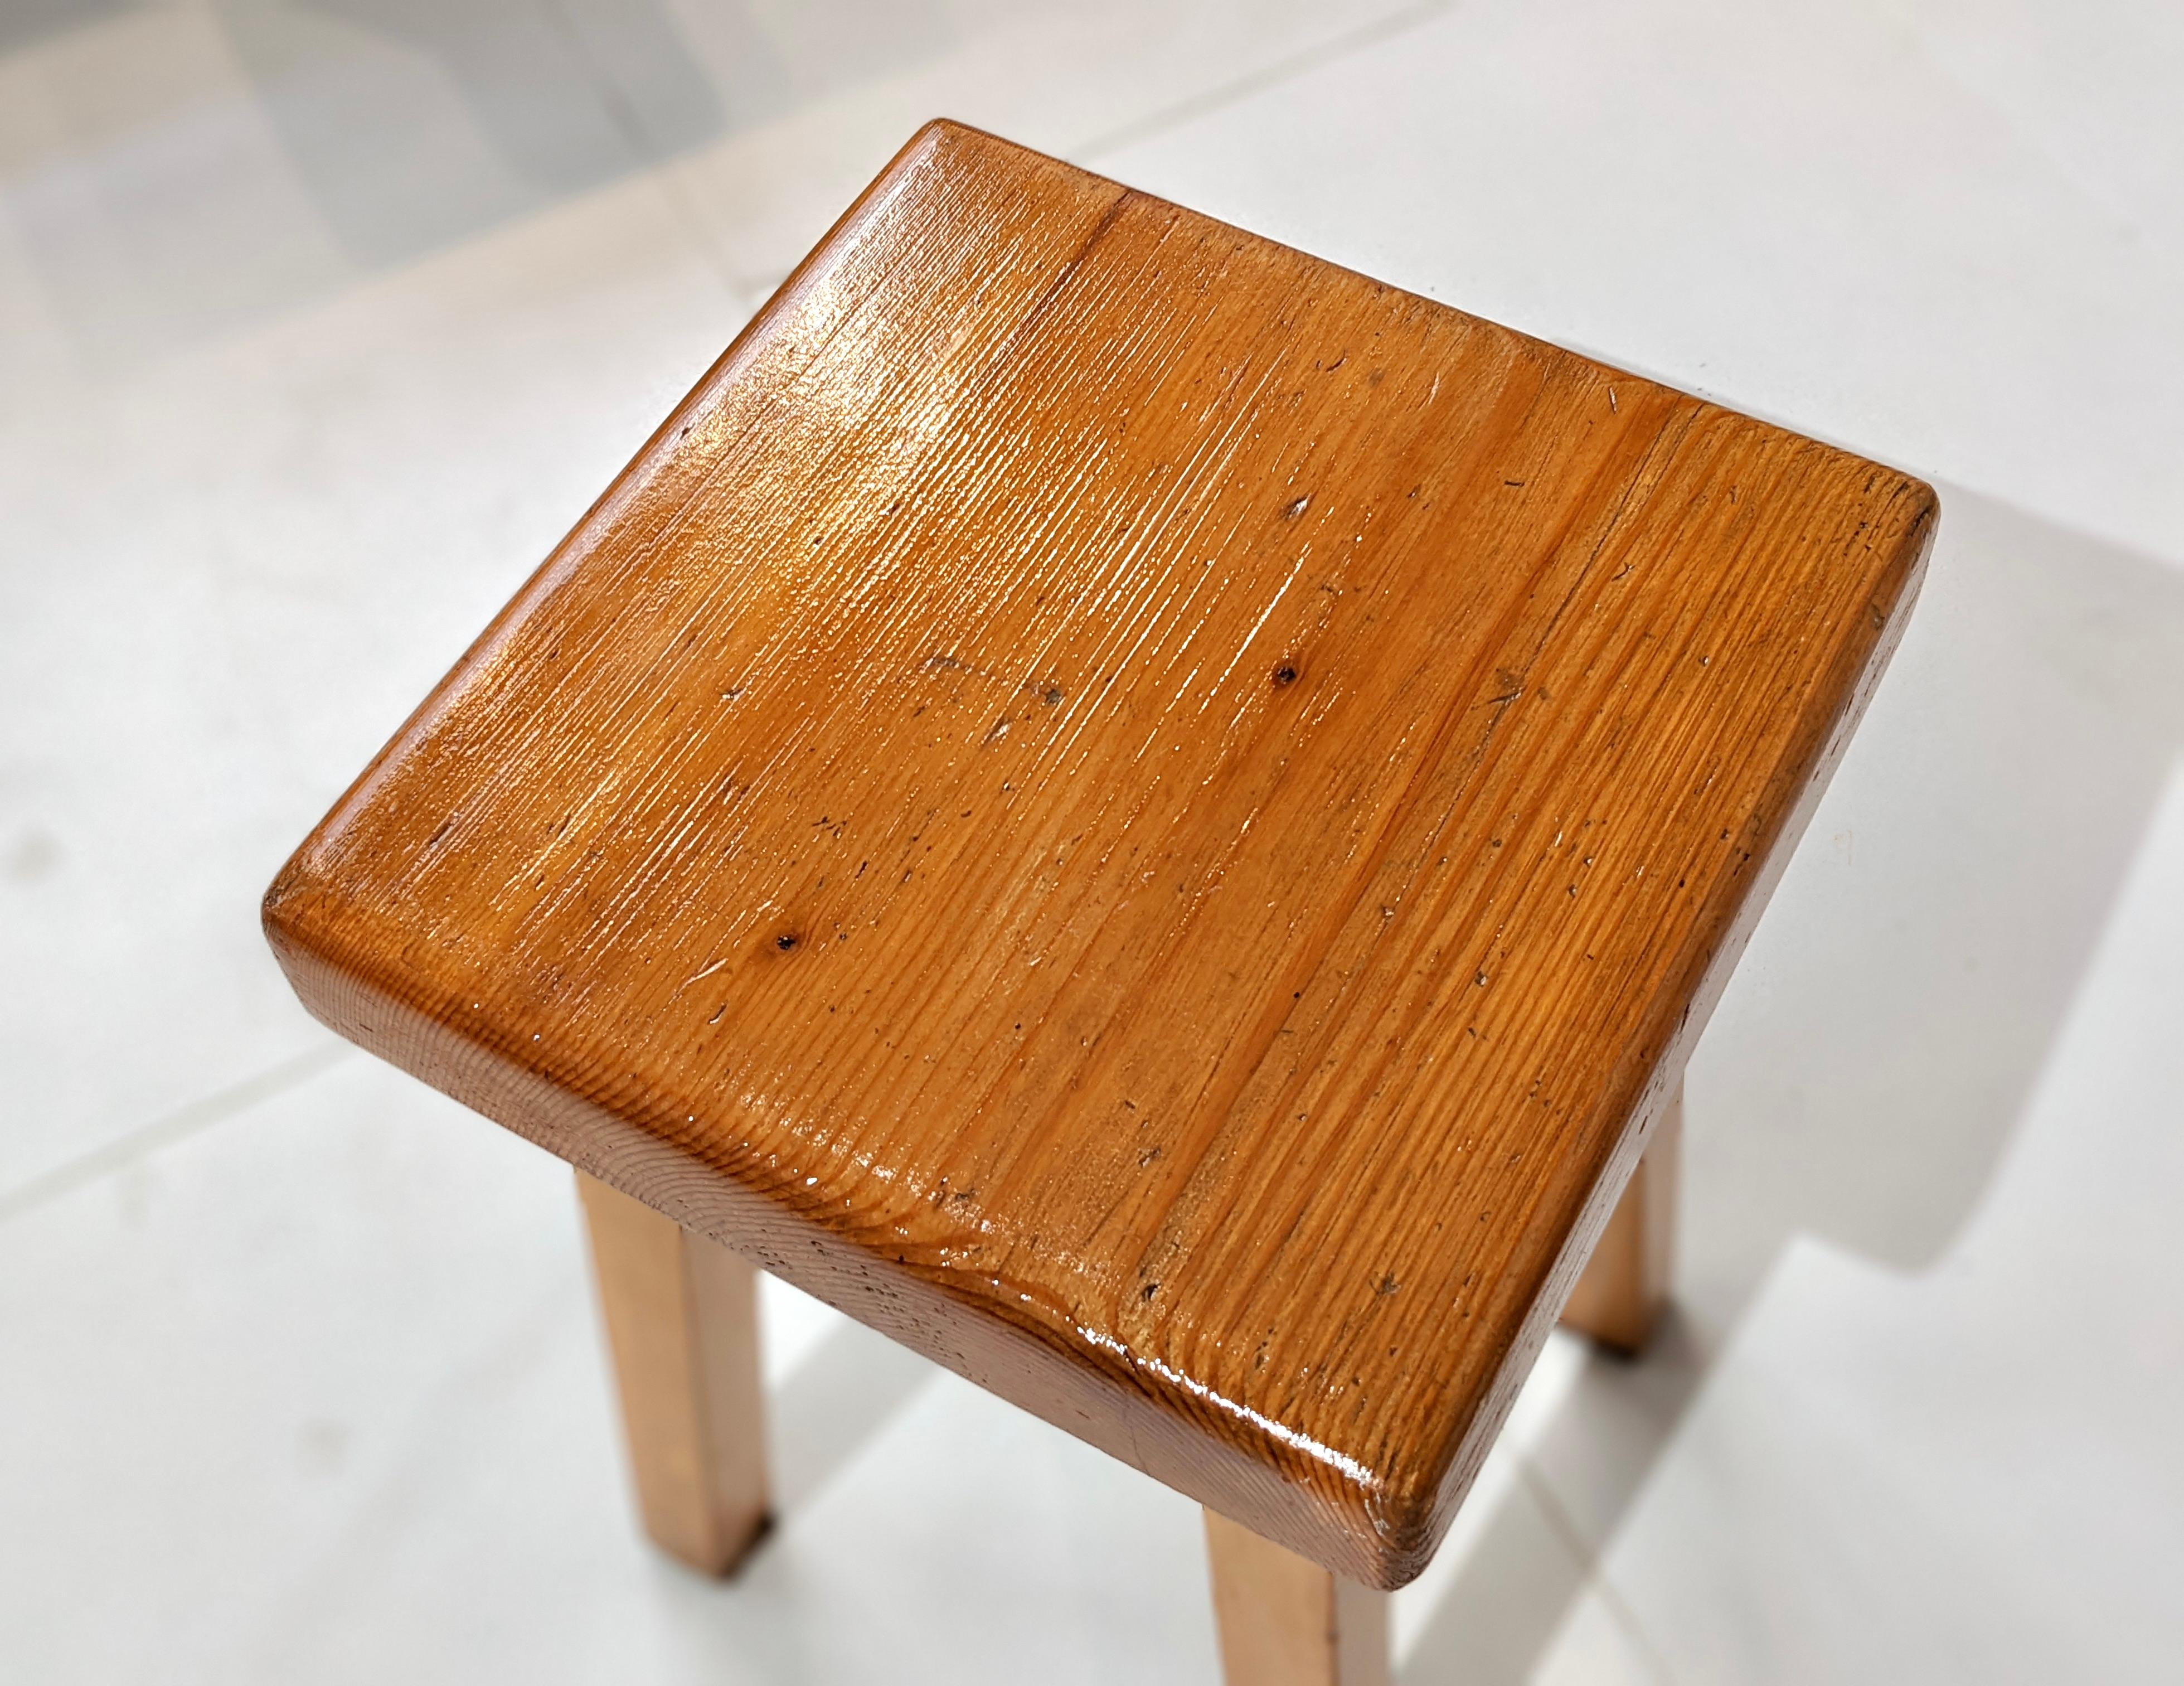 Pine wood stool by Charlotte Perriand for Les Arcs 1800. 
Square seat. Quadripod base. Very nice patina.
Provenance : residence l'Aiguille Grive. 1960's. Very good condition.
Slight traces of wear (see pictures)
Bibliography : page 330, volume